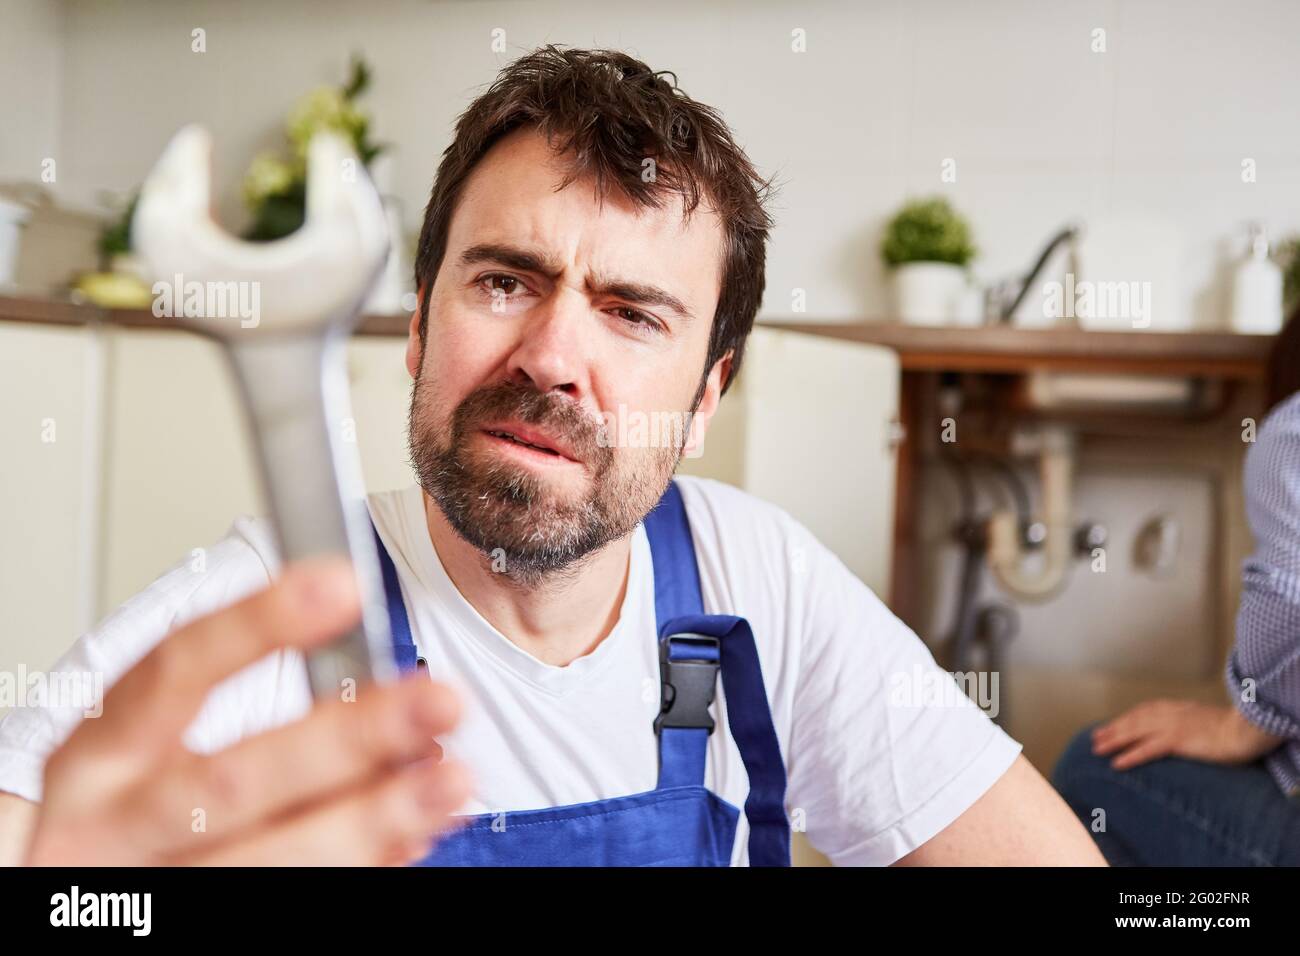 Handyman with large open-end wrench to repair the kitchen sink looks uncertain Stock Photo